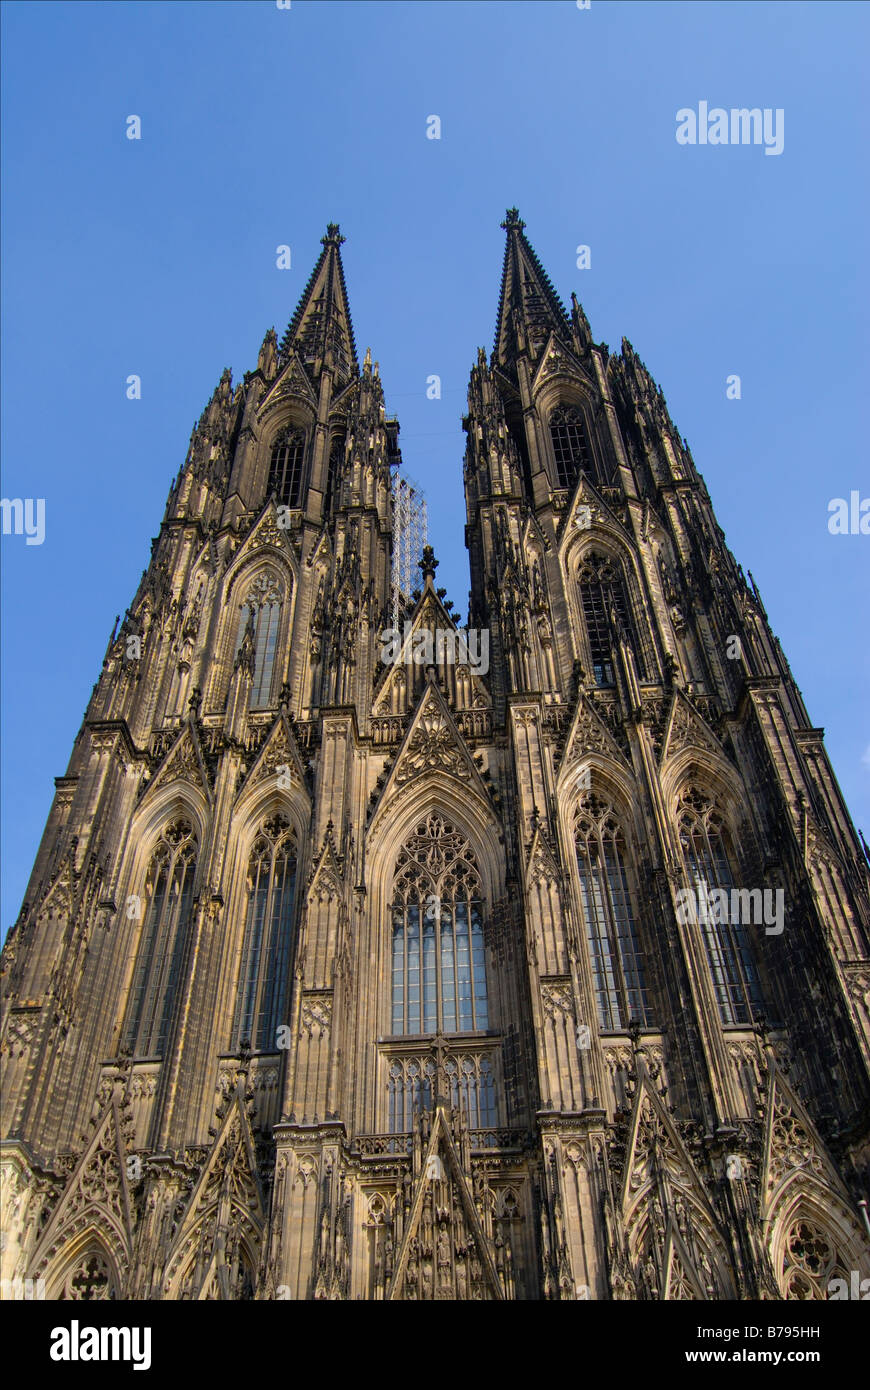 Germany Cologne the famous cathedral Kolner Dom Stock Photo